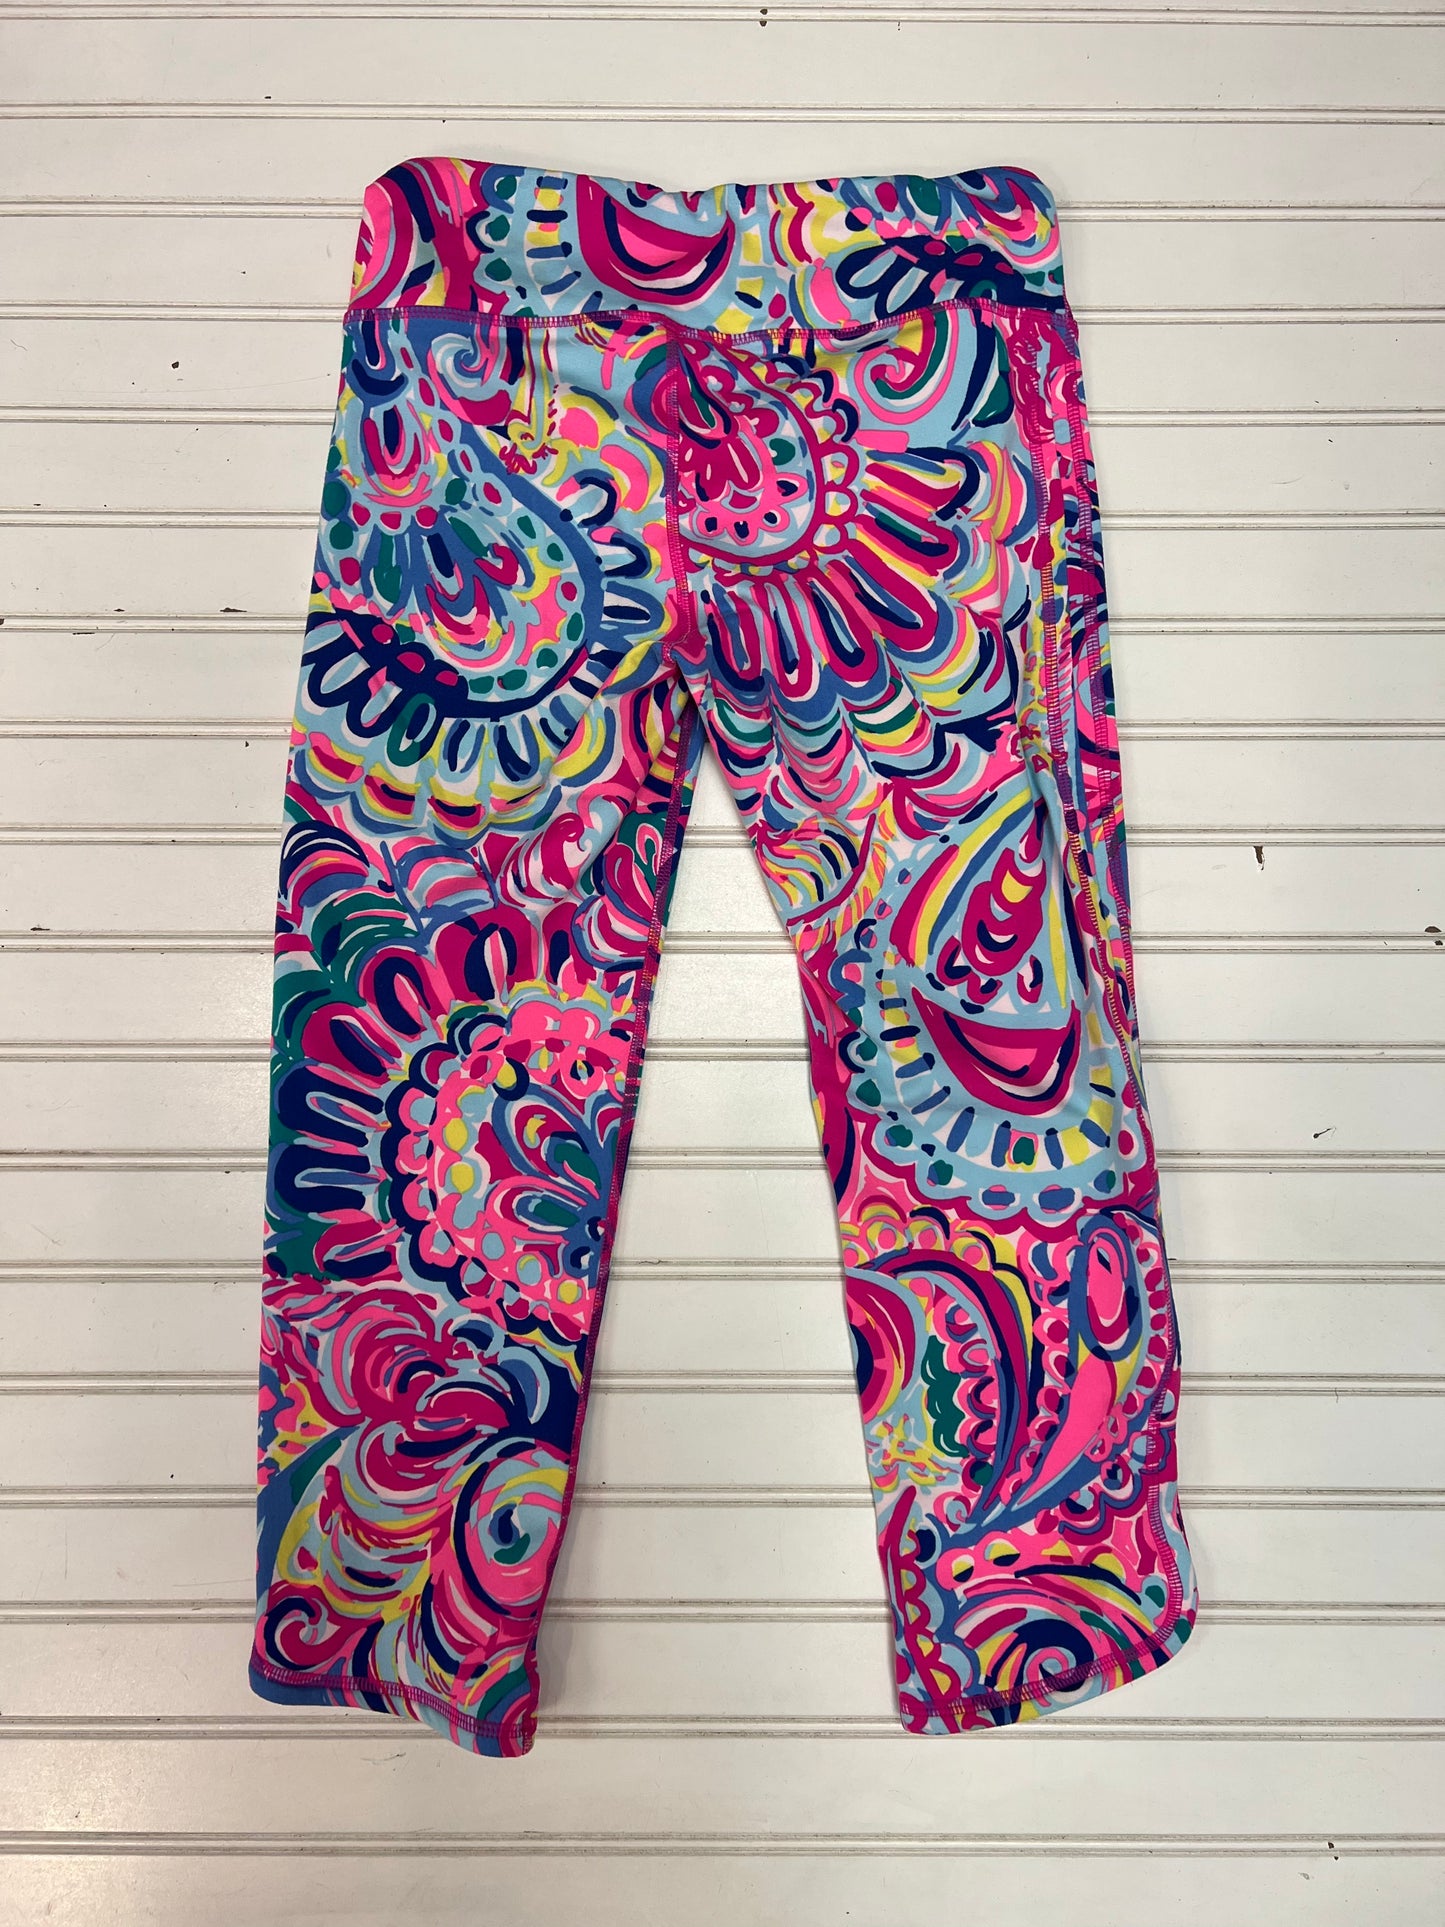 Athletic Leggings Capris By Lilly Pulitzer  Size: S